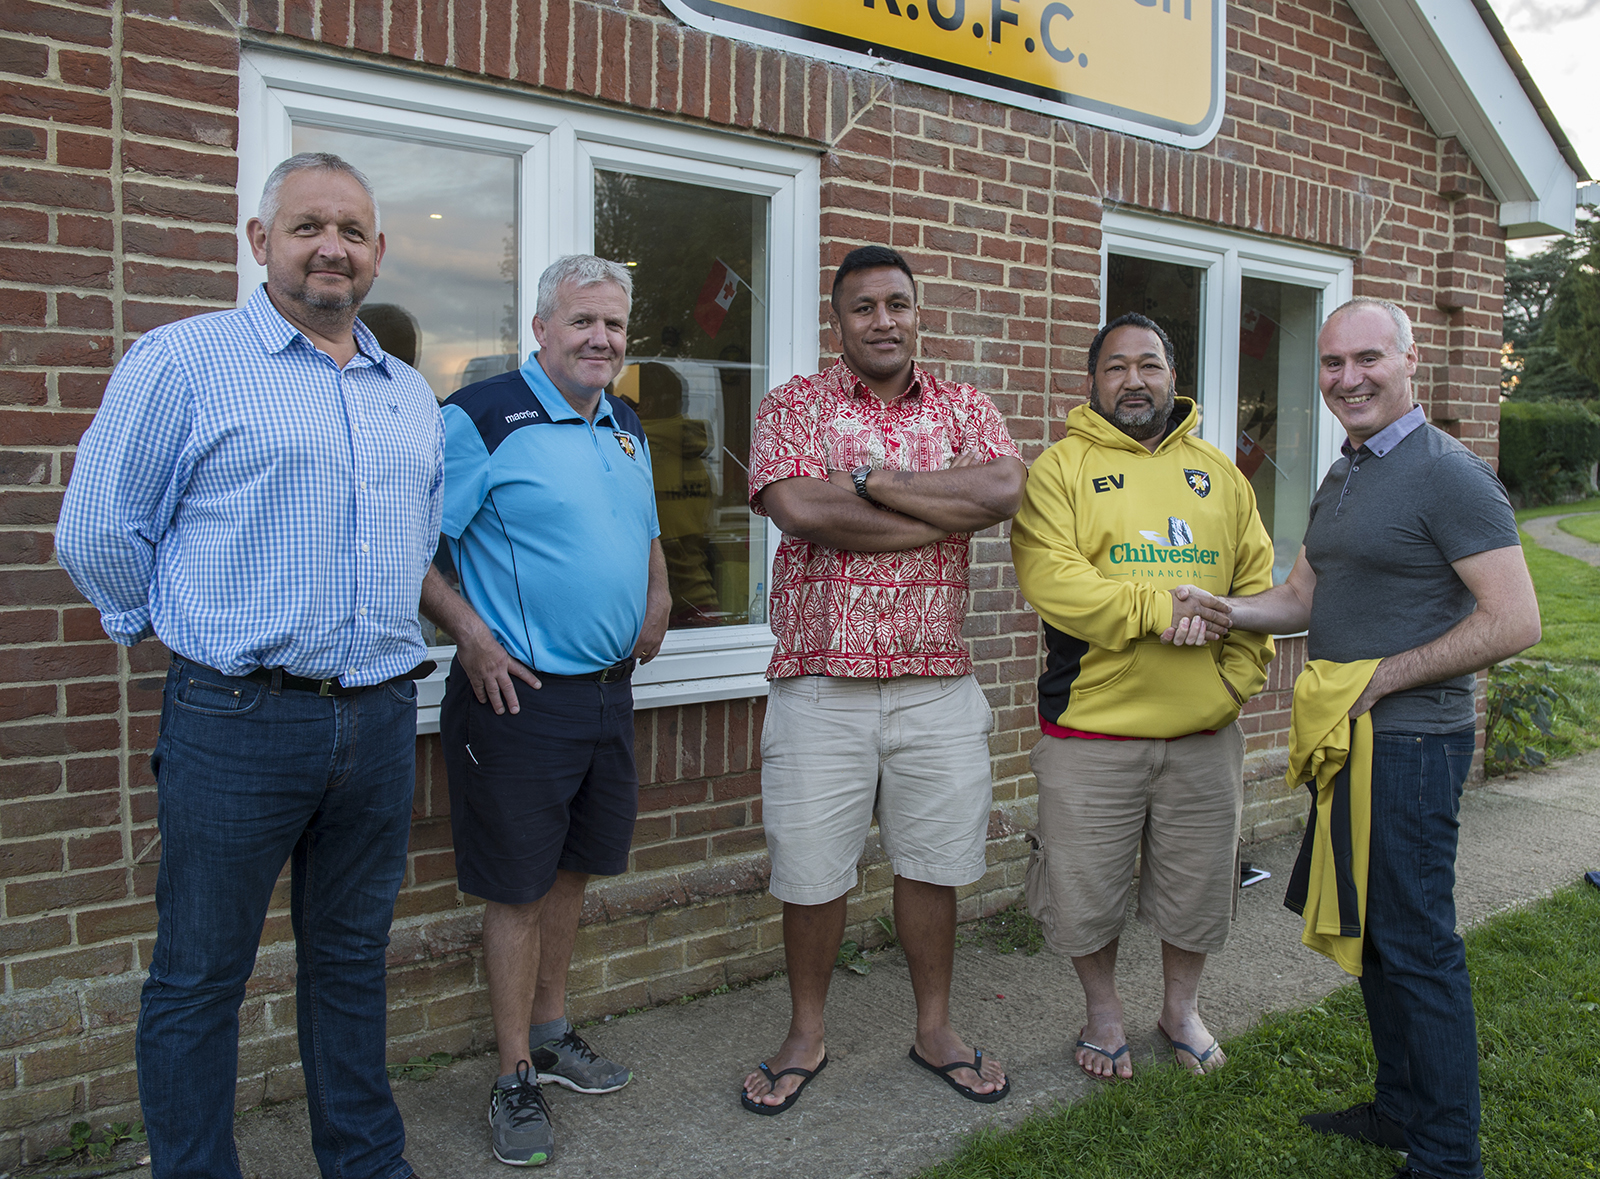 L-R:  Clive Robins – Chair of the MRFC Mini Section, Gary Sharp – Chairman of MRFC, Mako Vunipola – nephew of MRFC’s new Director of Coaching, Elisi Vunipola – MRFC Director of Coaching, Andy Tottman – Director of Chilvester Financial, the new long term sponsor of MRFC’s coaches